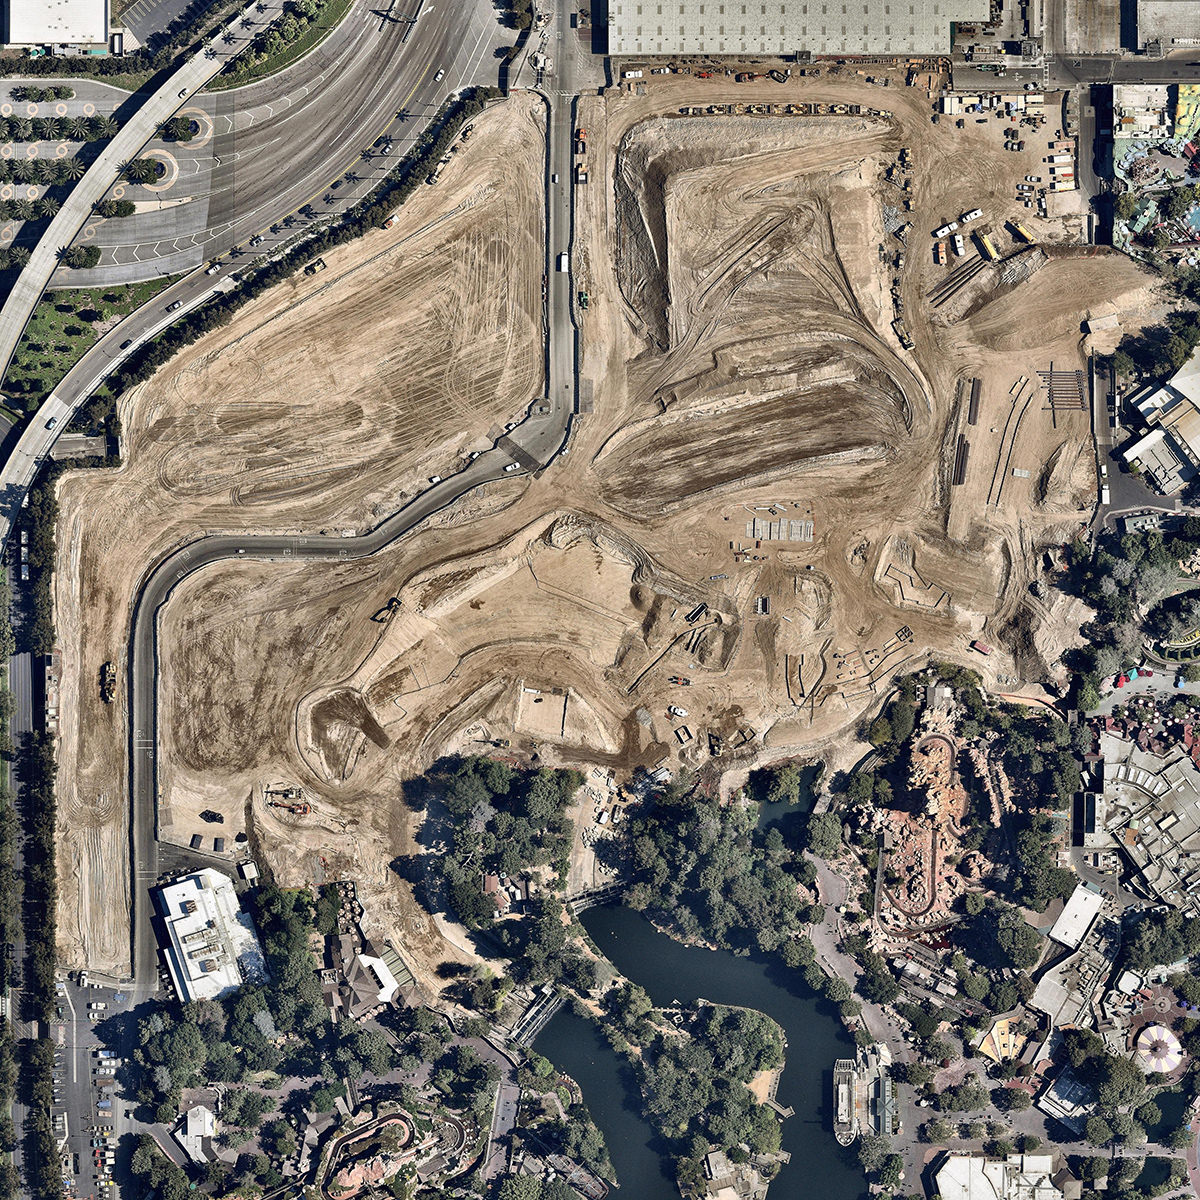 Star Wars Land Aerial View by NearMap